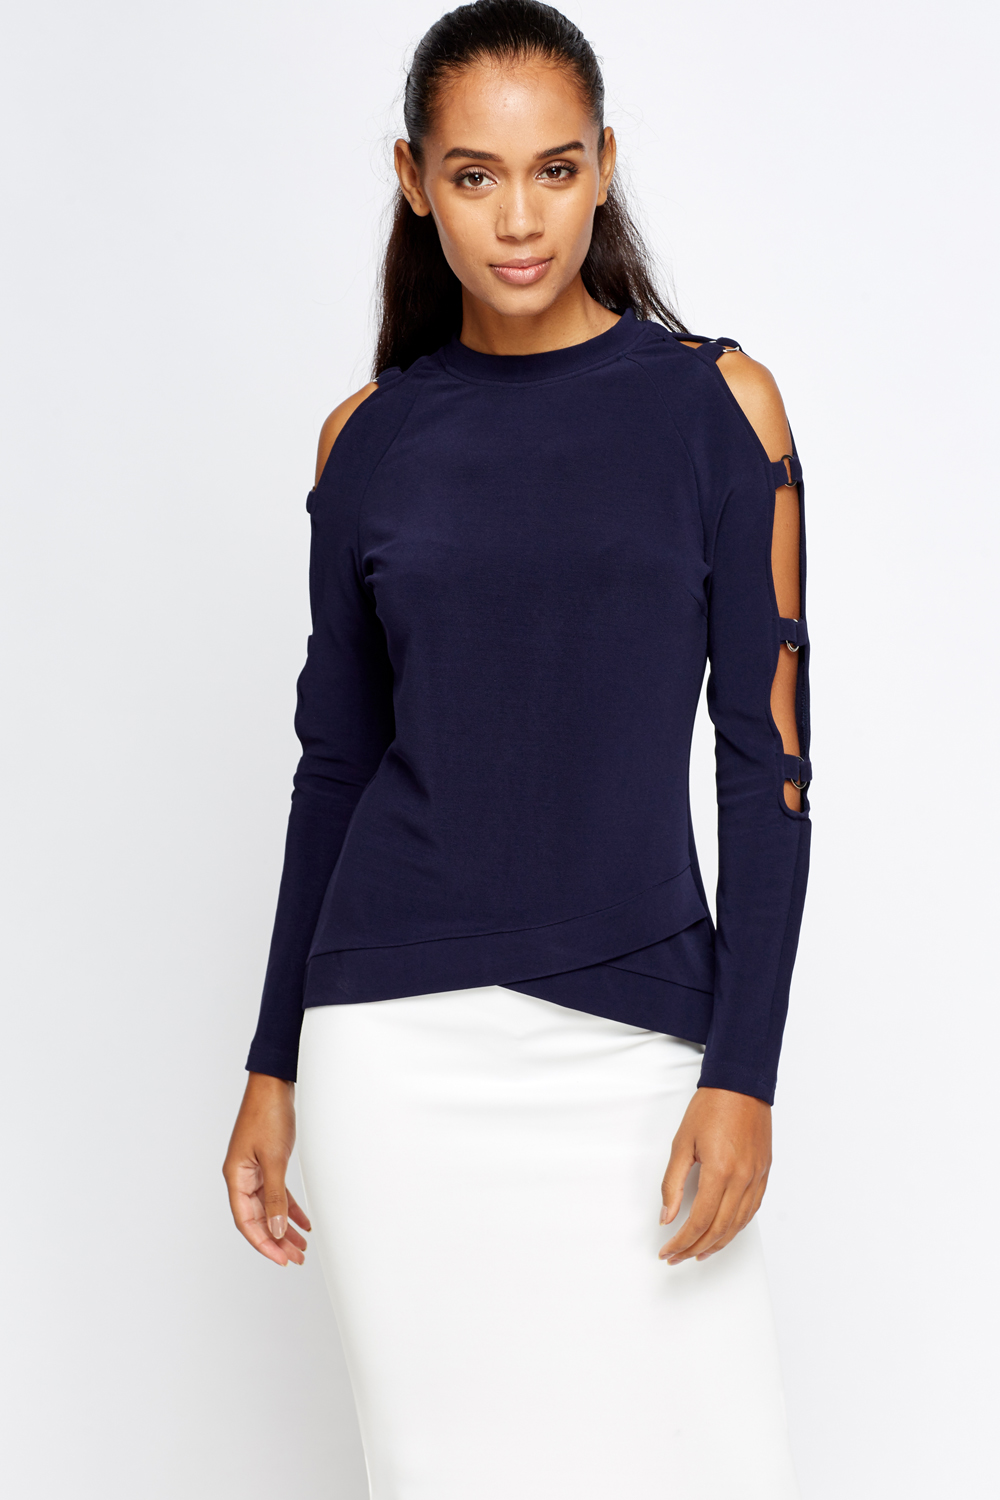 Cut Sleeves High Neck Top - Just $7